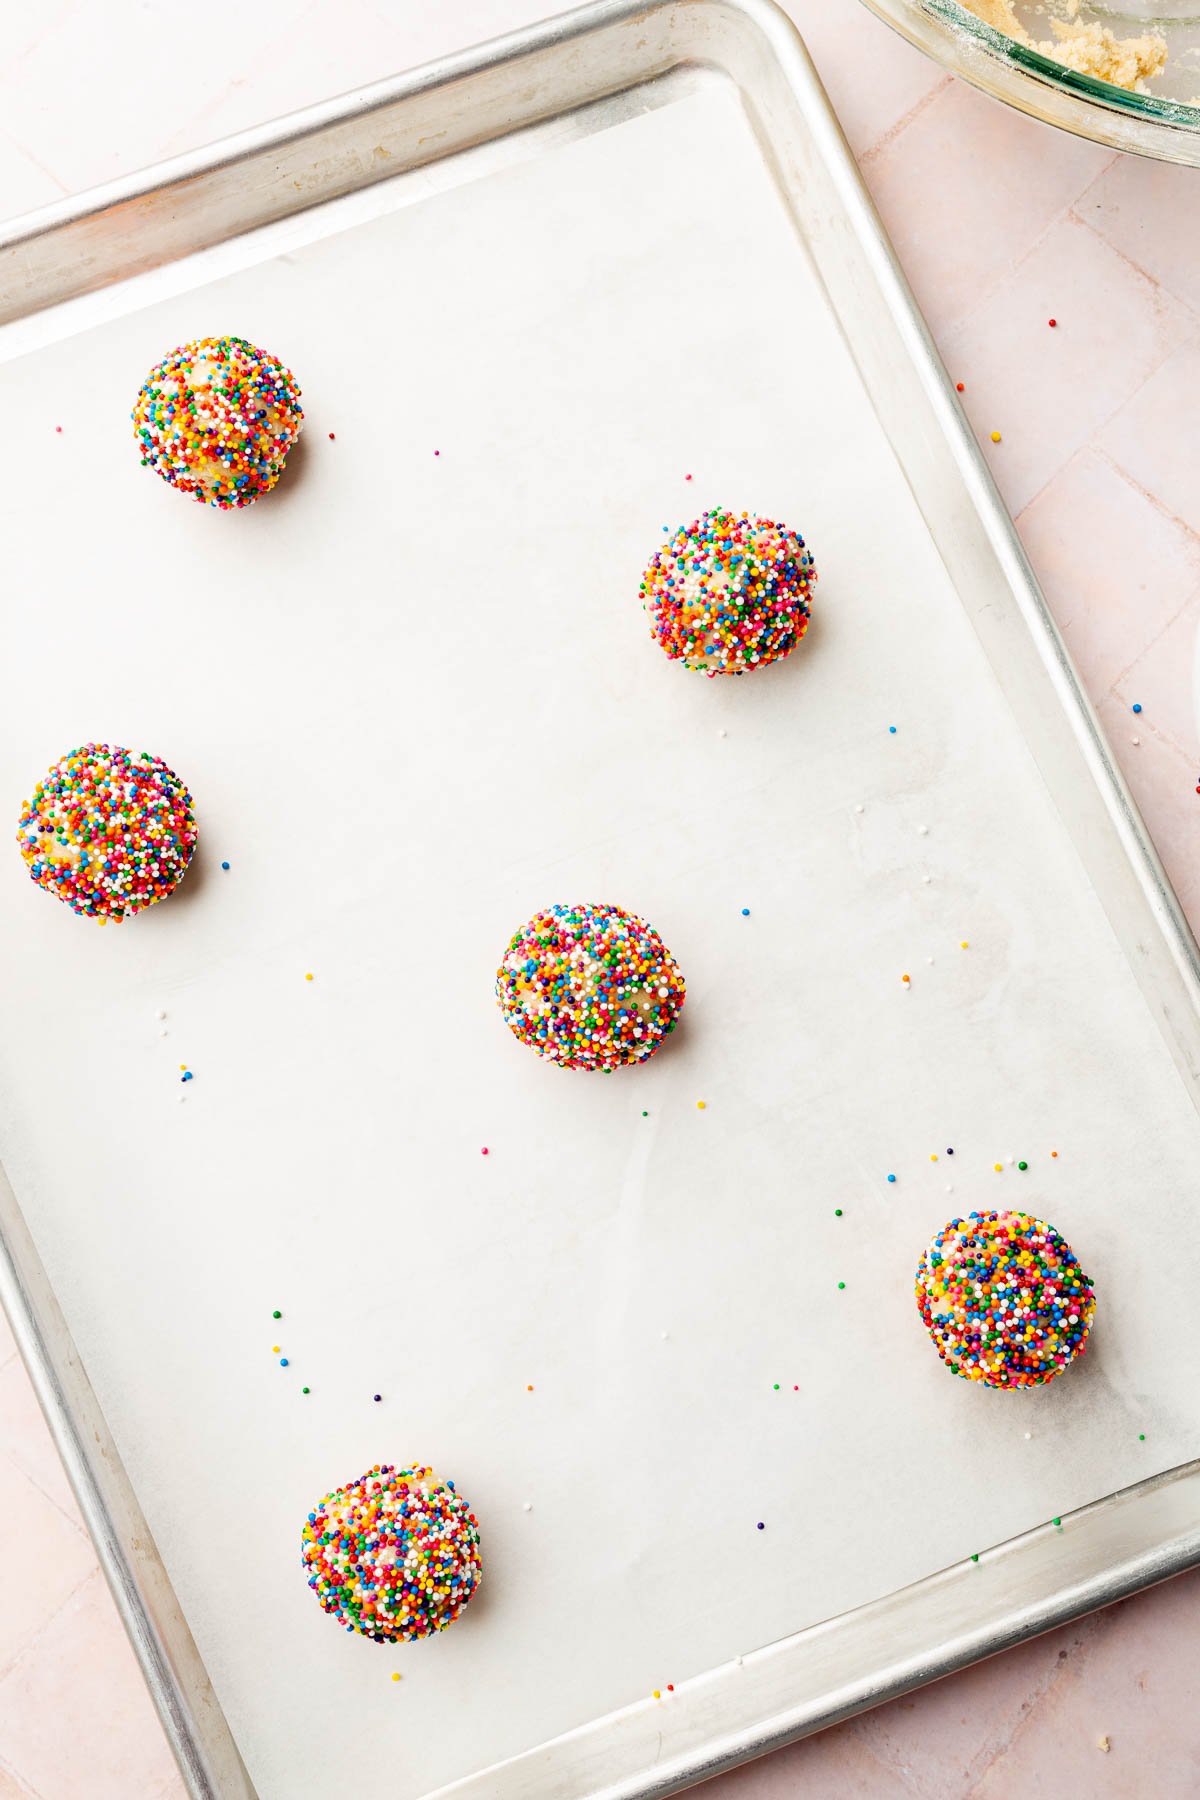 A baking sheet lined with parchment paper and topped with six gluten free sprinkle sugar cookie dough balls before baking in the oven.